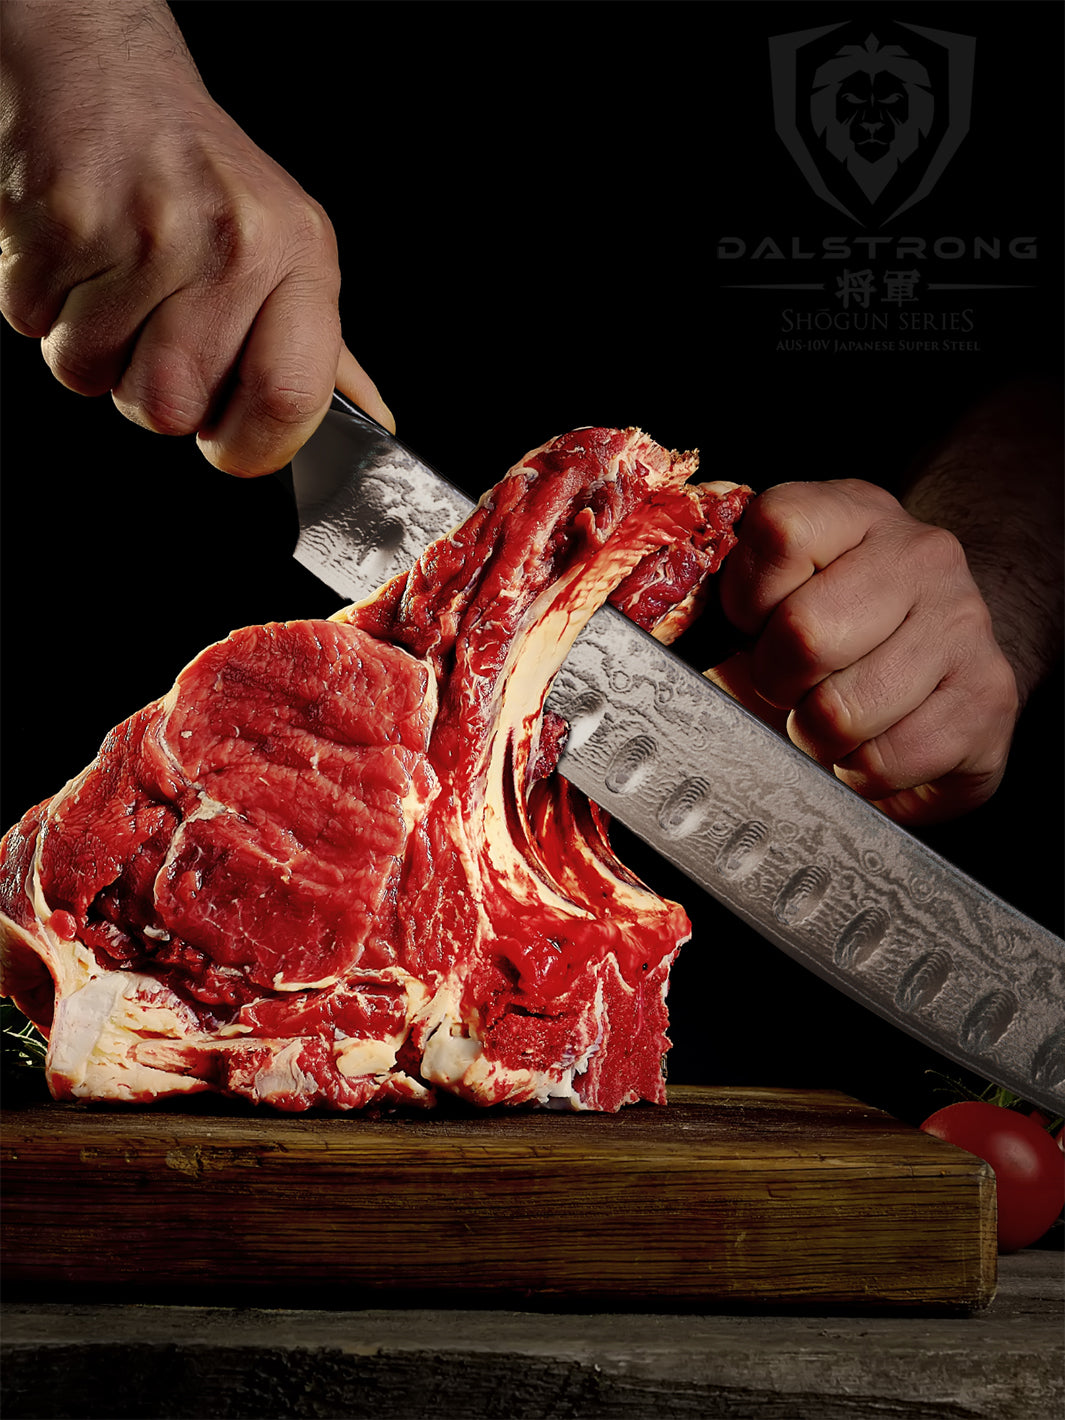 Dalstrong Bull Nose Butcher Knife - 10 - Shogun Series - Japanese AUS-10V Super Steel - Vacuum Heat Treatment - with Sheath - Meat, BBQ, Breaking